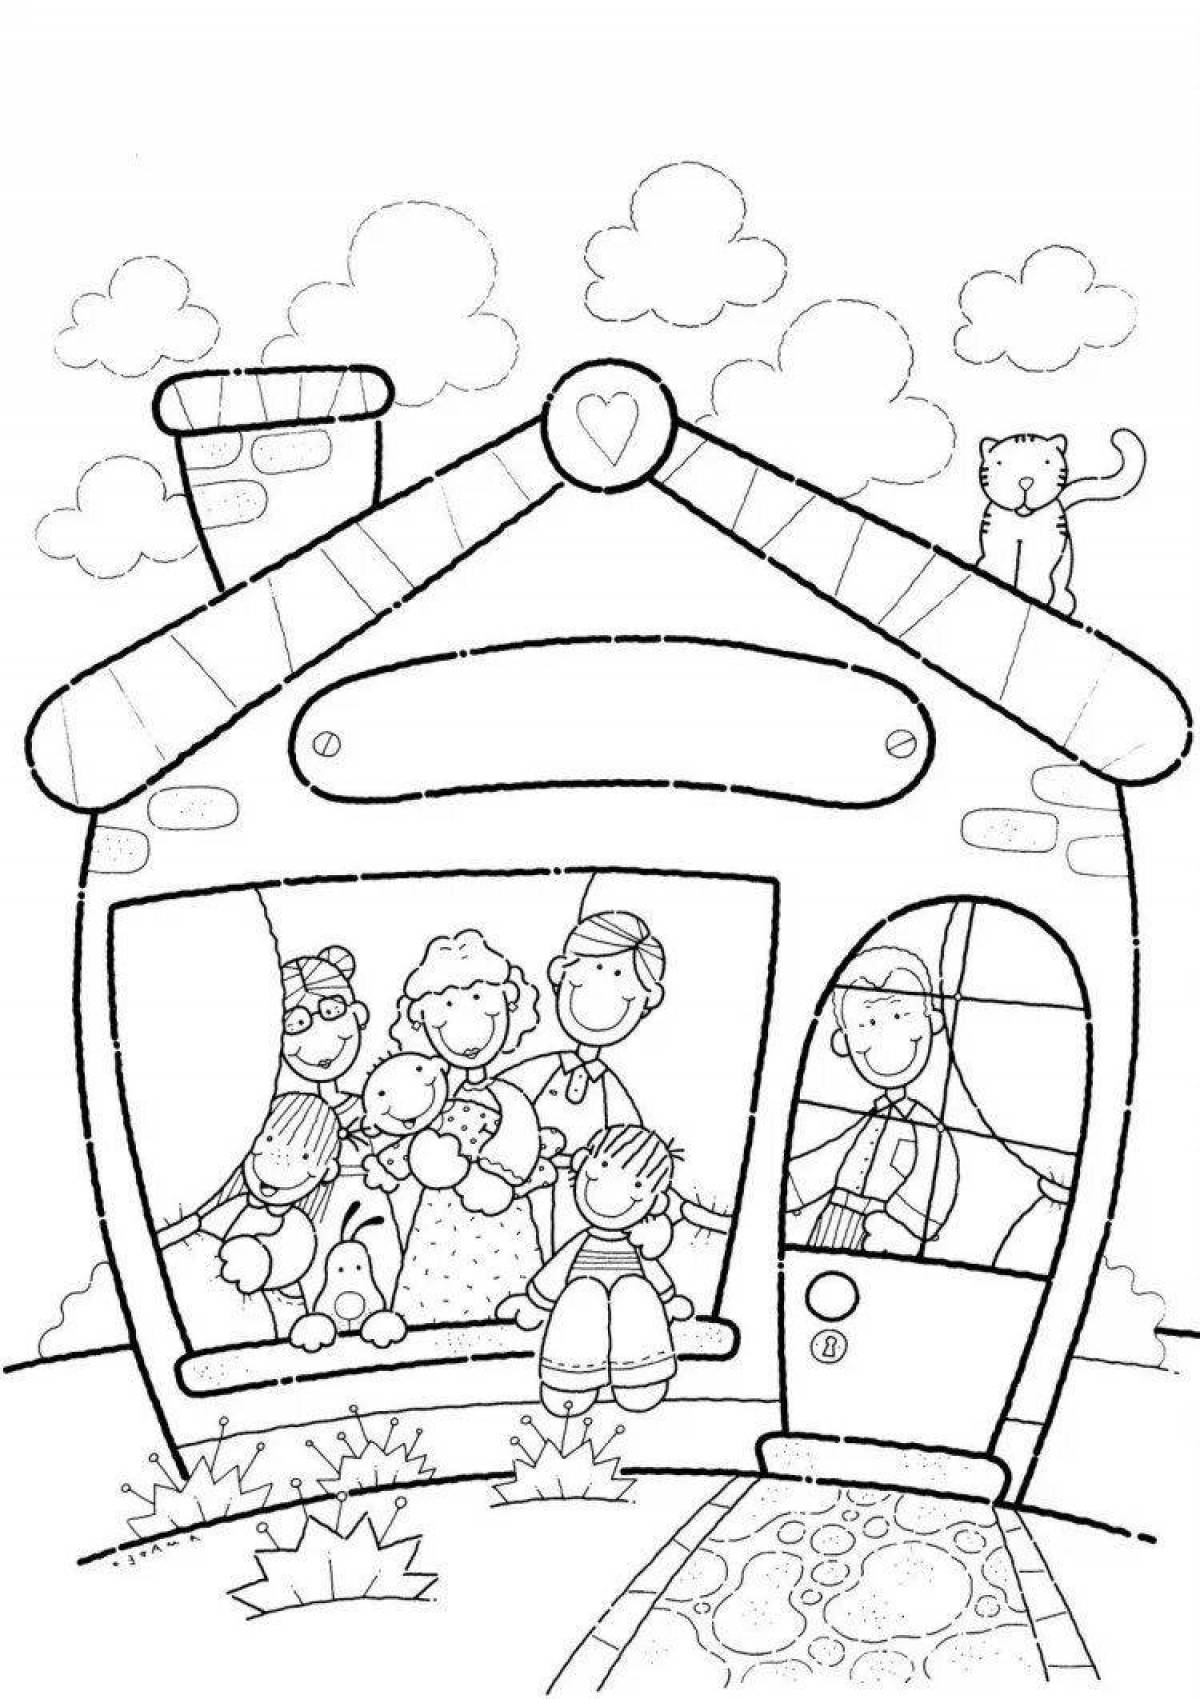 Vibrant financial literacy coloring book for preschoolers